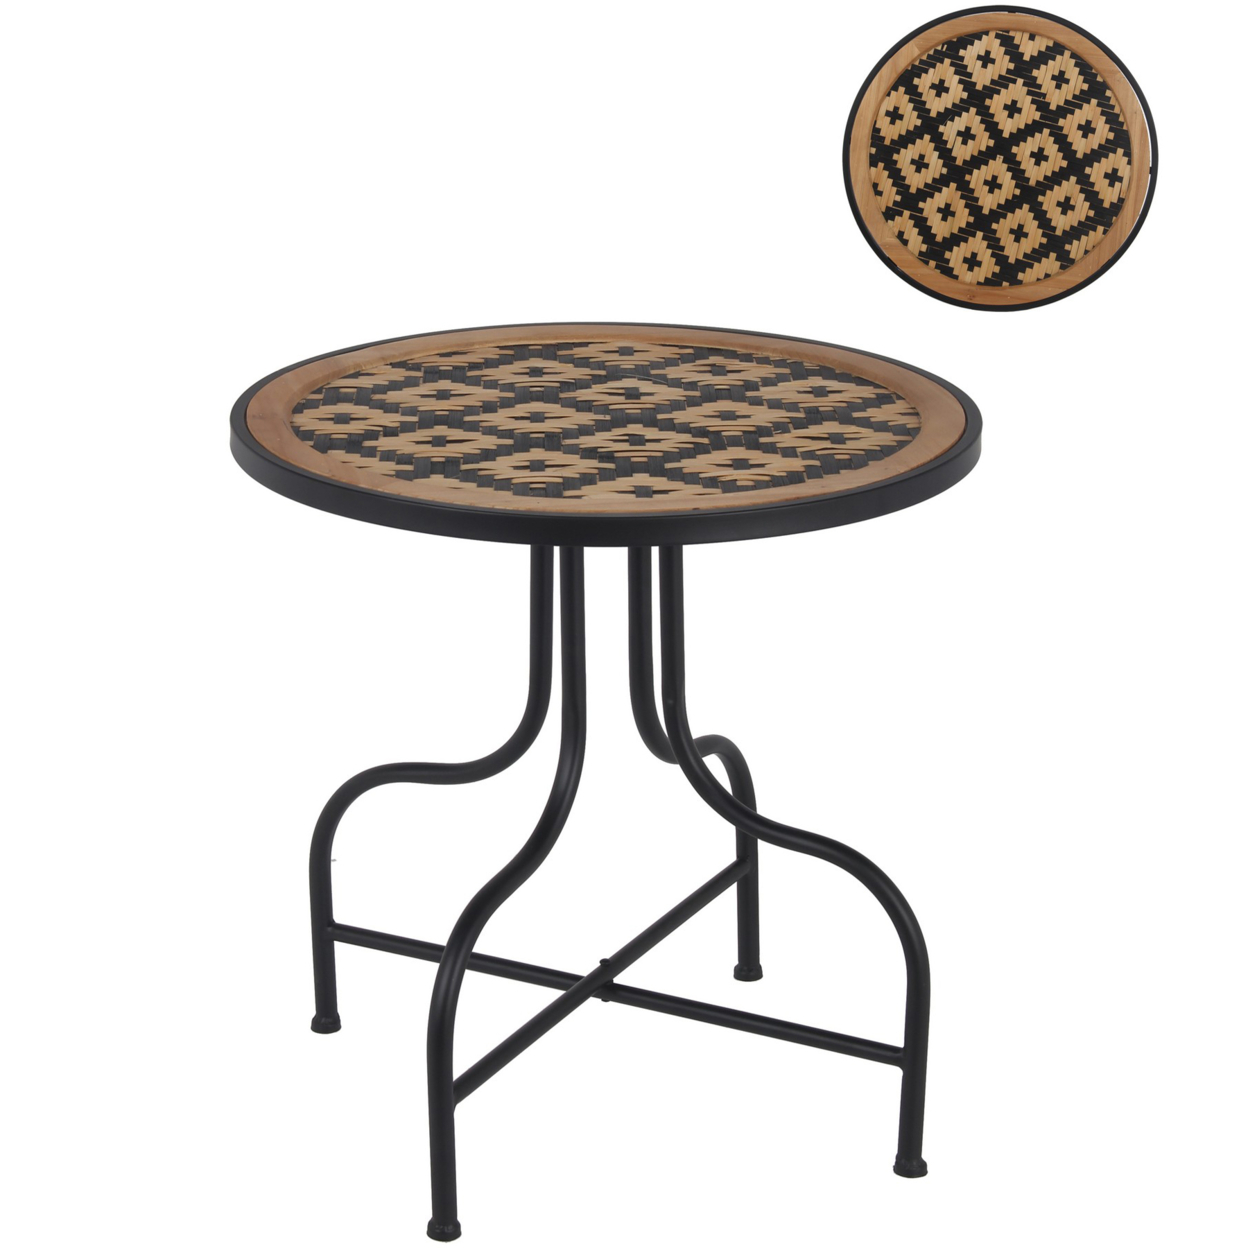 20 Inch Round Top Accent Table With Vinyl Weaving, Brown And Black- Saltoro Sherpi